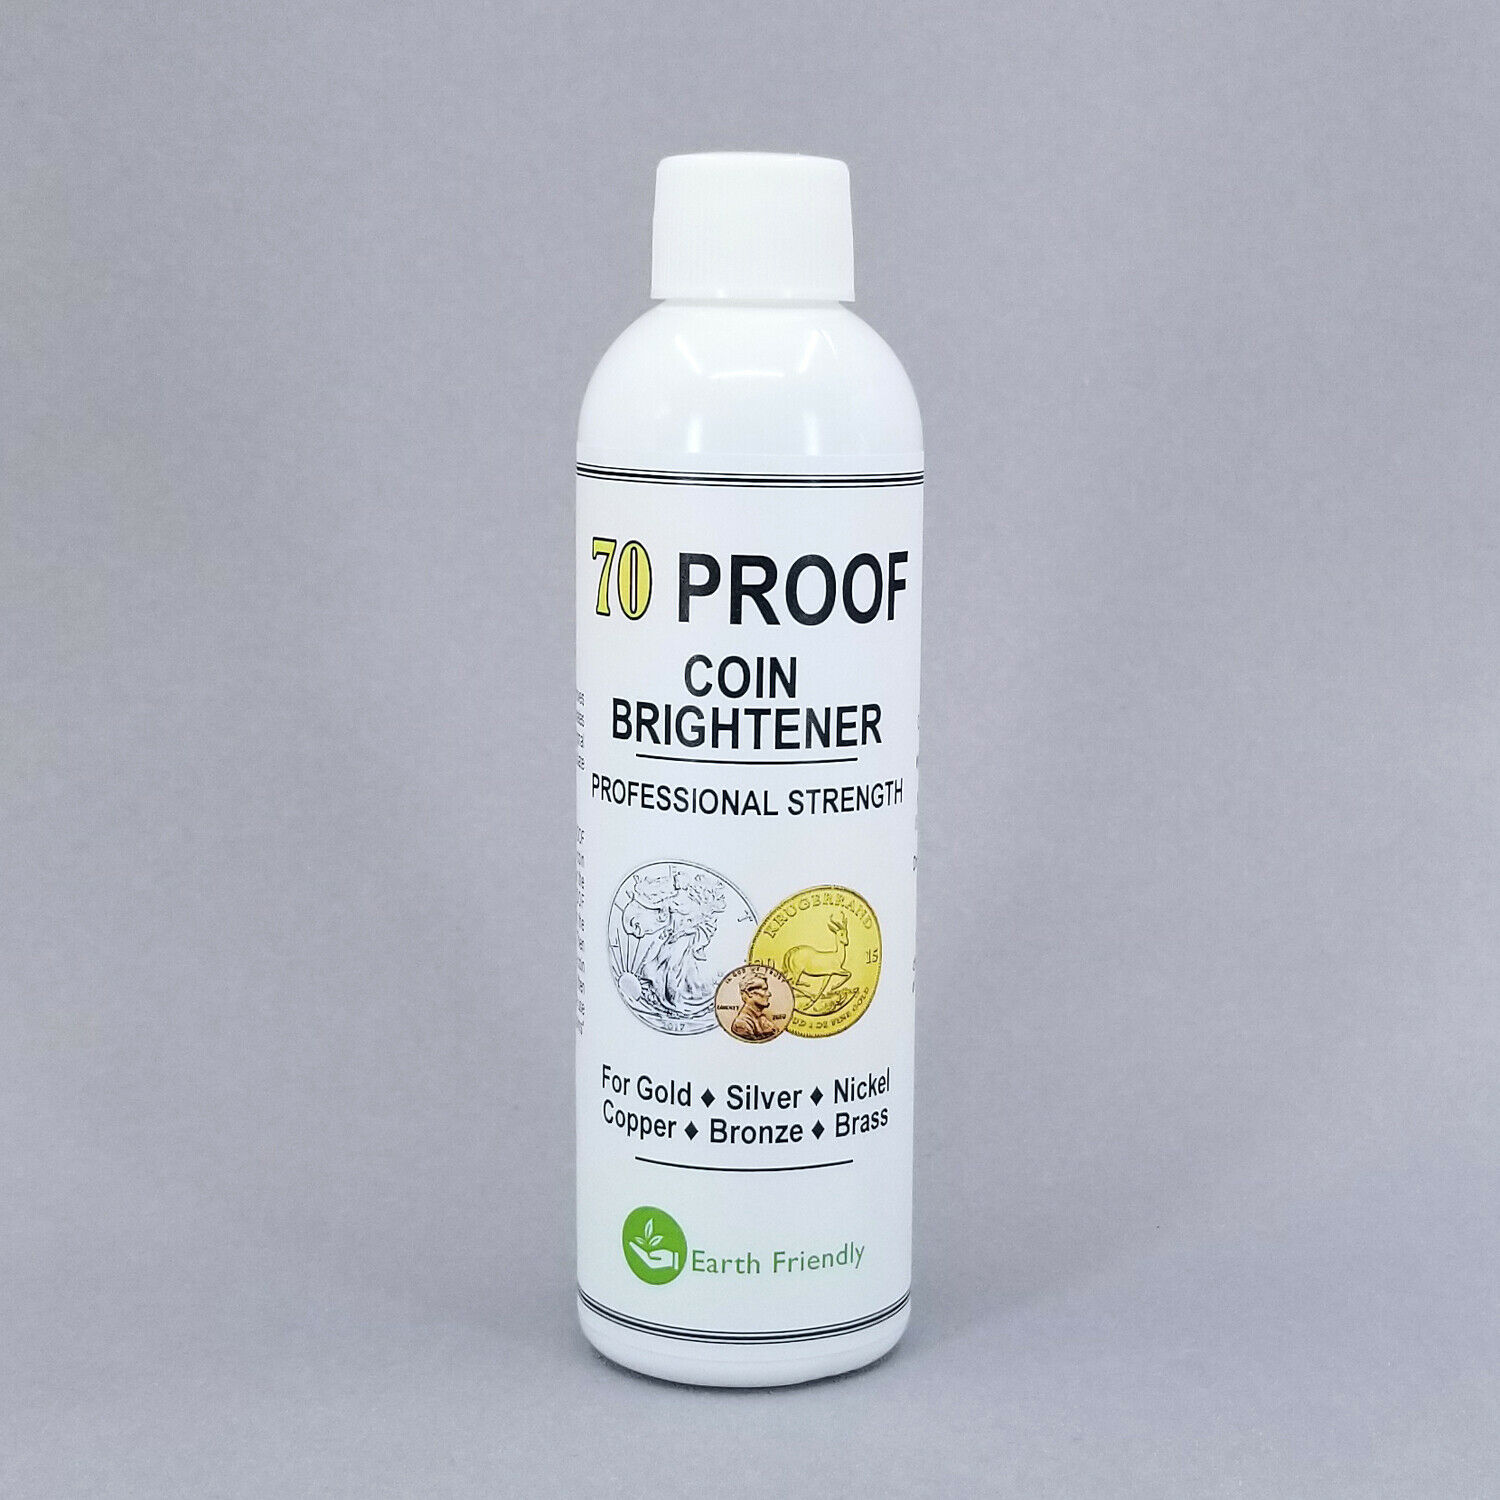 70 Proof Coin Brightener & Cleaner For Gold Silver Copper Nickel Bronze Ms-70